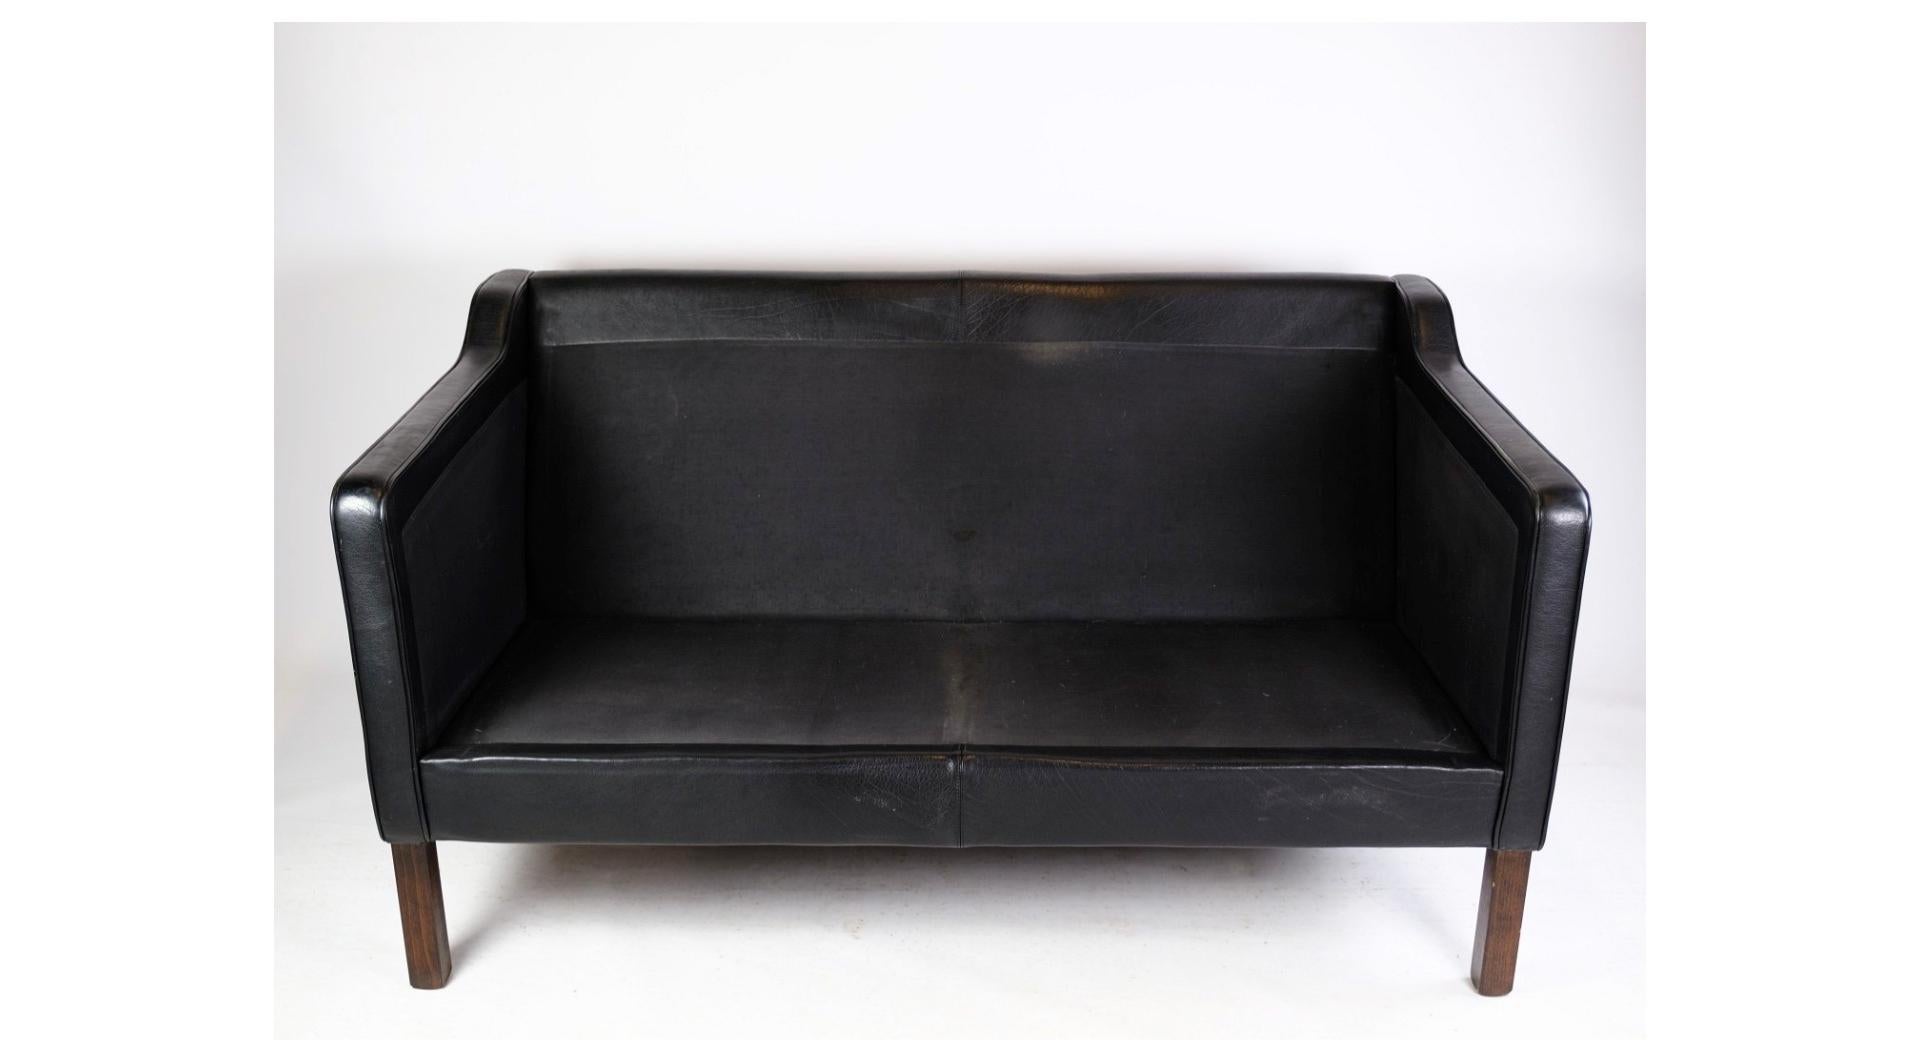 A two-seater sofa upholstered in black leather made by Stouby Møbelfabrik in the 1960s. The sofa stands with natural patina as well as loose cushions and armrests. A sofa of high quality and design.
Dimensions in cm: H: 75 W: 144 D: 66 SH: